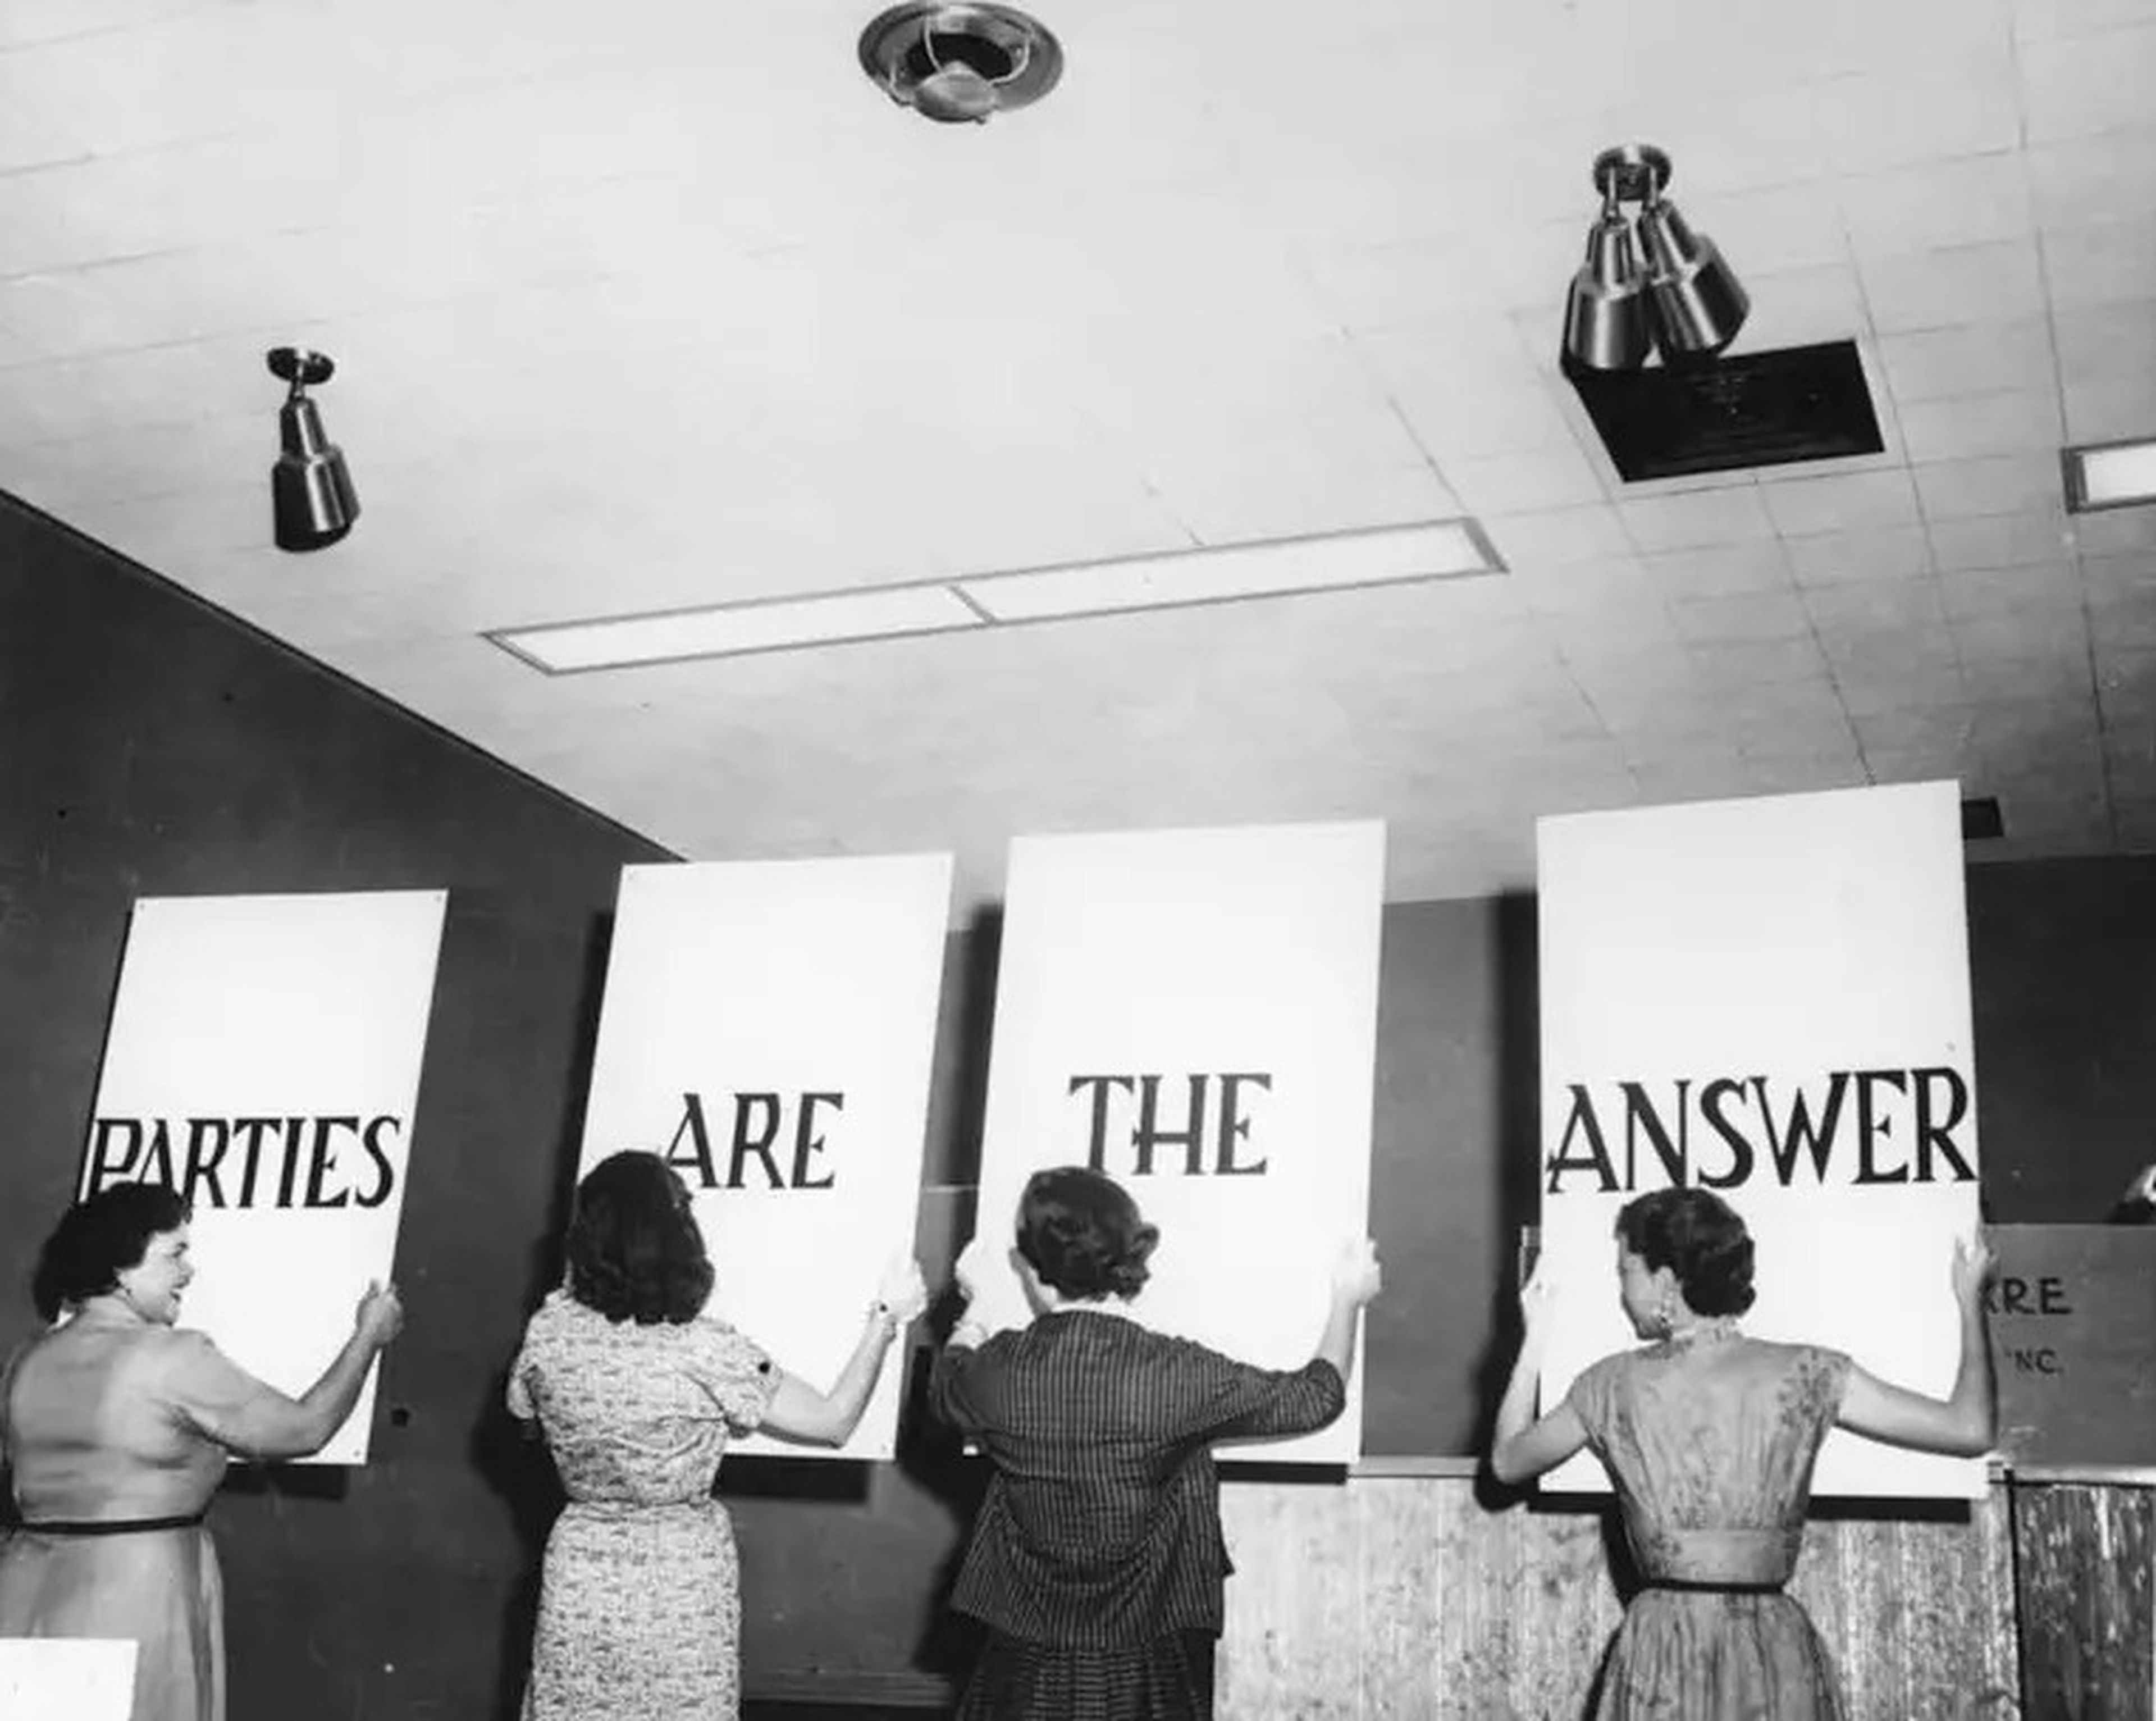 Tupperware hosts hold signs that read "Parties are the answer"